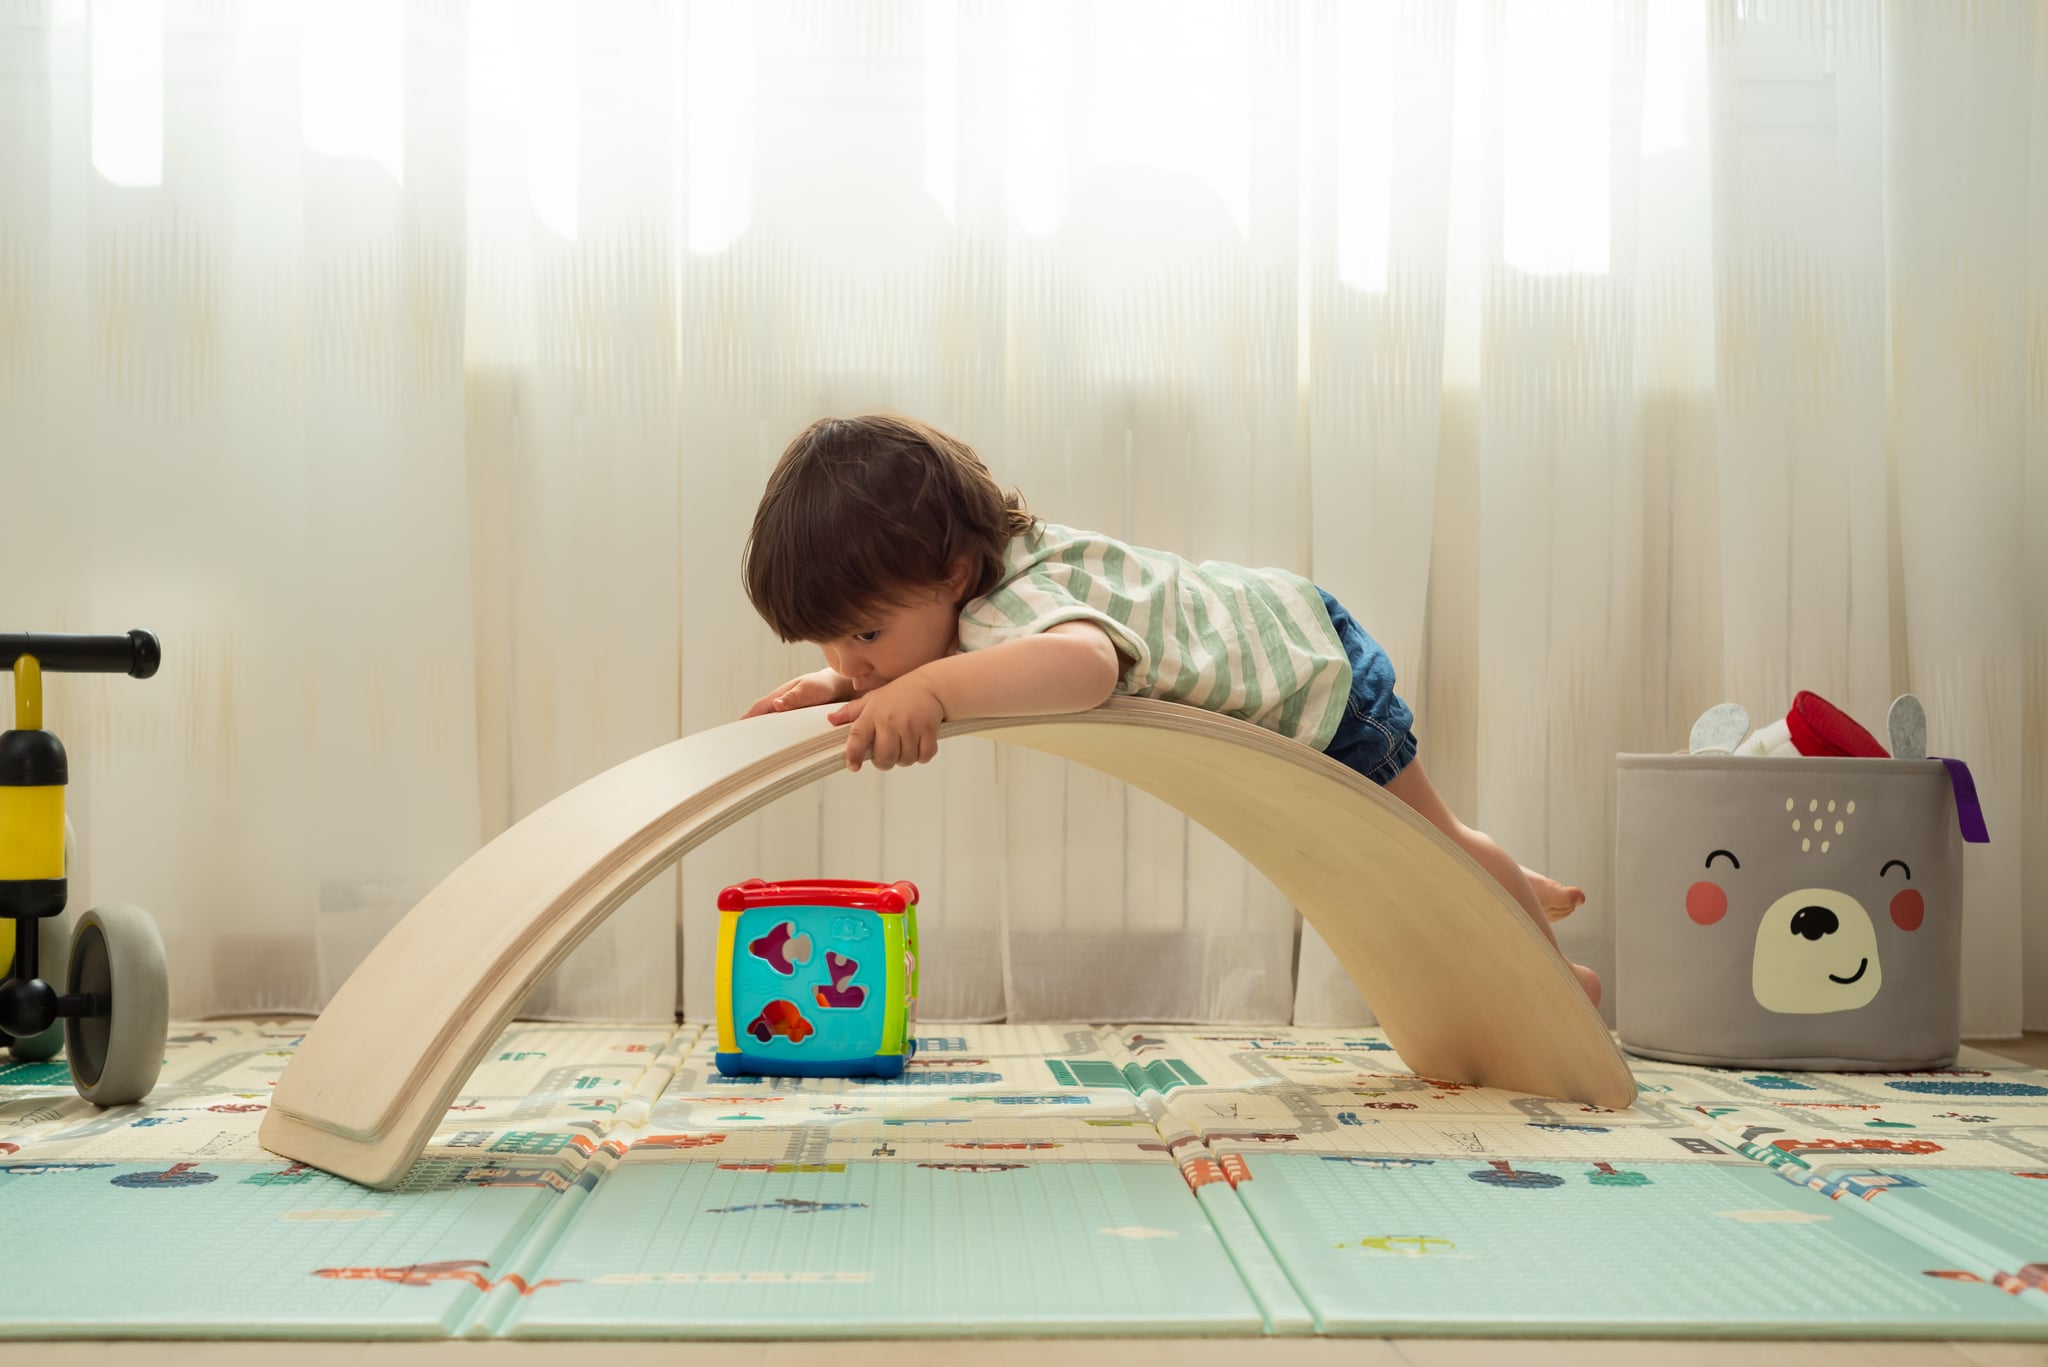 <p>The local park may be a no-go, but indoor playground activities can weather-proof plans for kids who love climbing (and keep them off your tables). Time spent on pickler triangles and slides makes for some of the best indoor activities for toddlers and pre-schoolers, while <a href="https://www.popsugar.com/family/indoor-fort-building-kits-47391298" class="ga-track">forts are excellent for older kids</a>. </p>